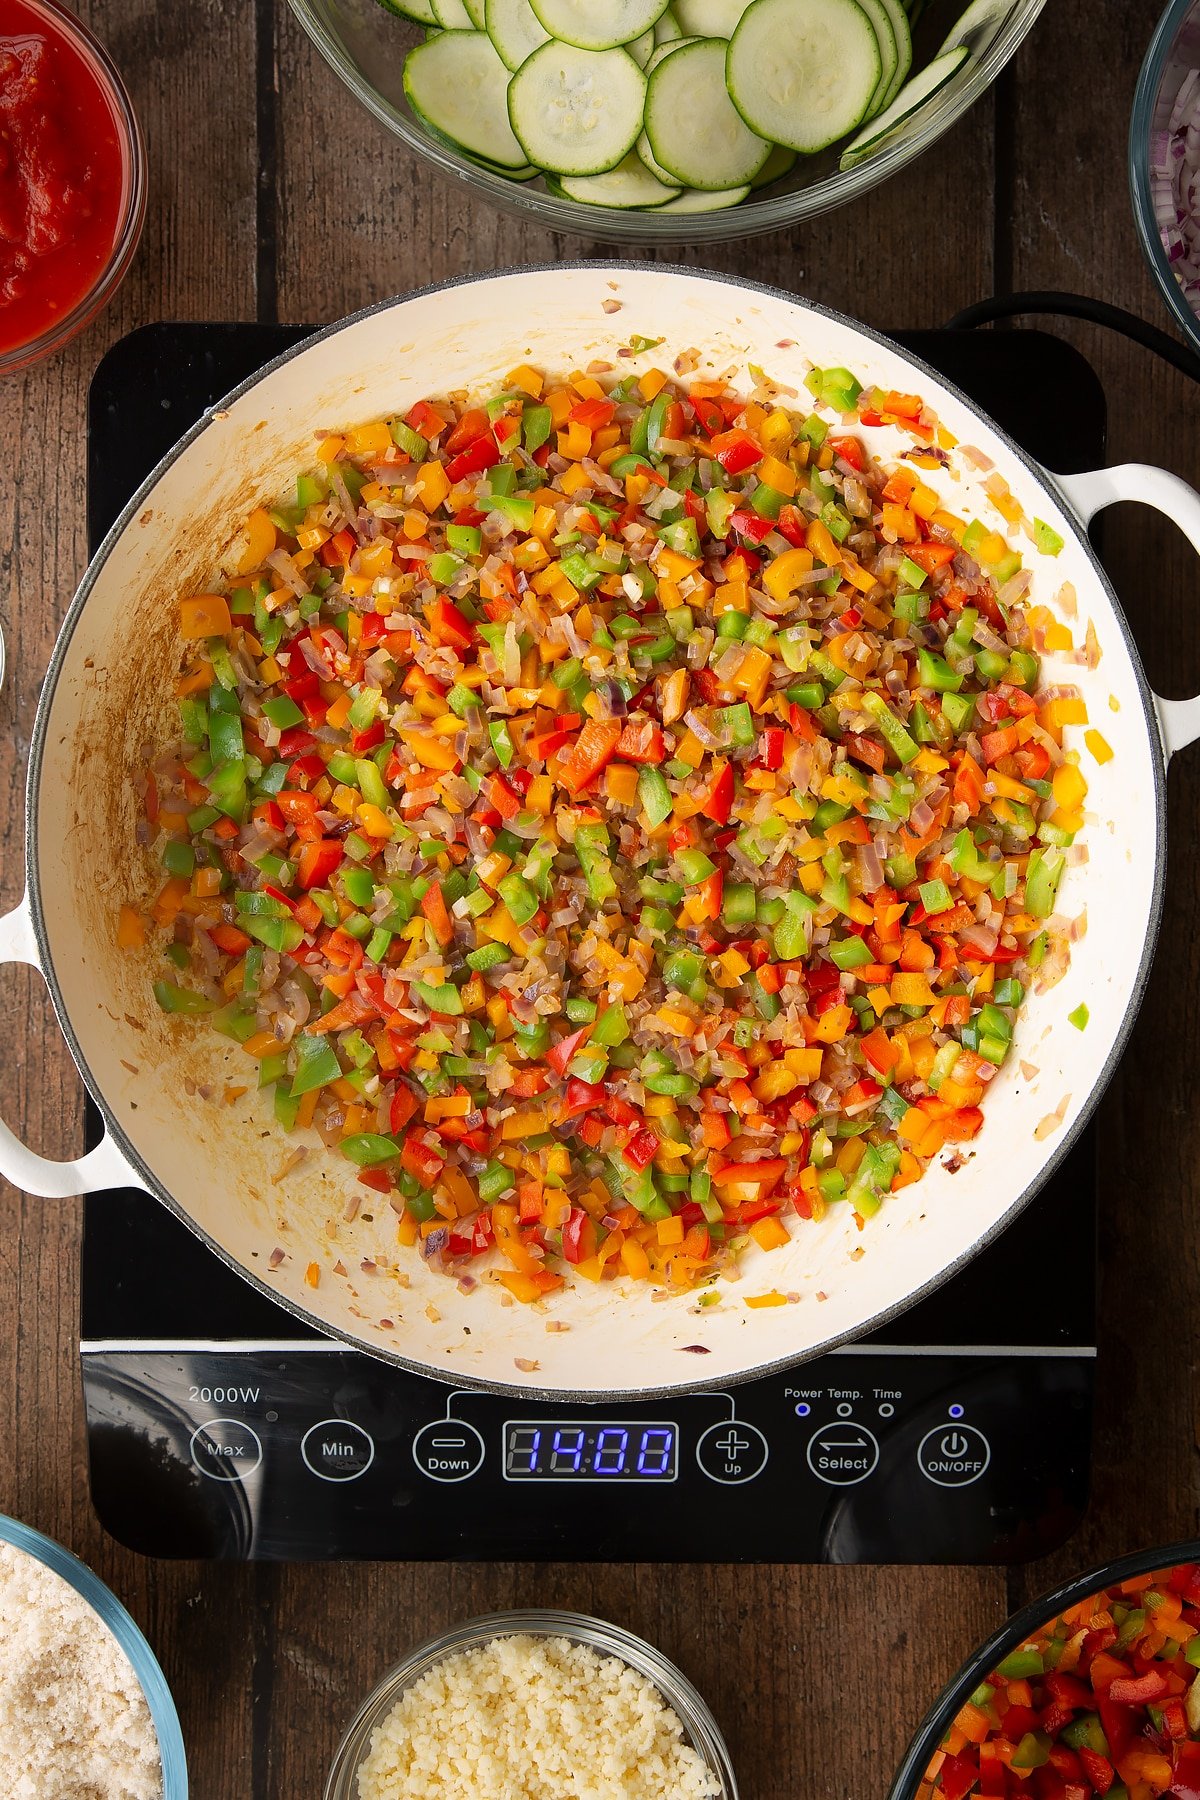 cooked onion and peppers mix in a large white frying pan on induction hob.